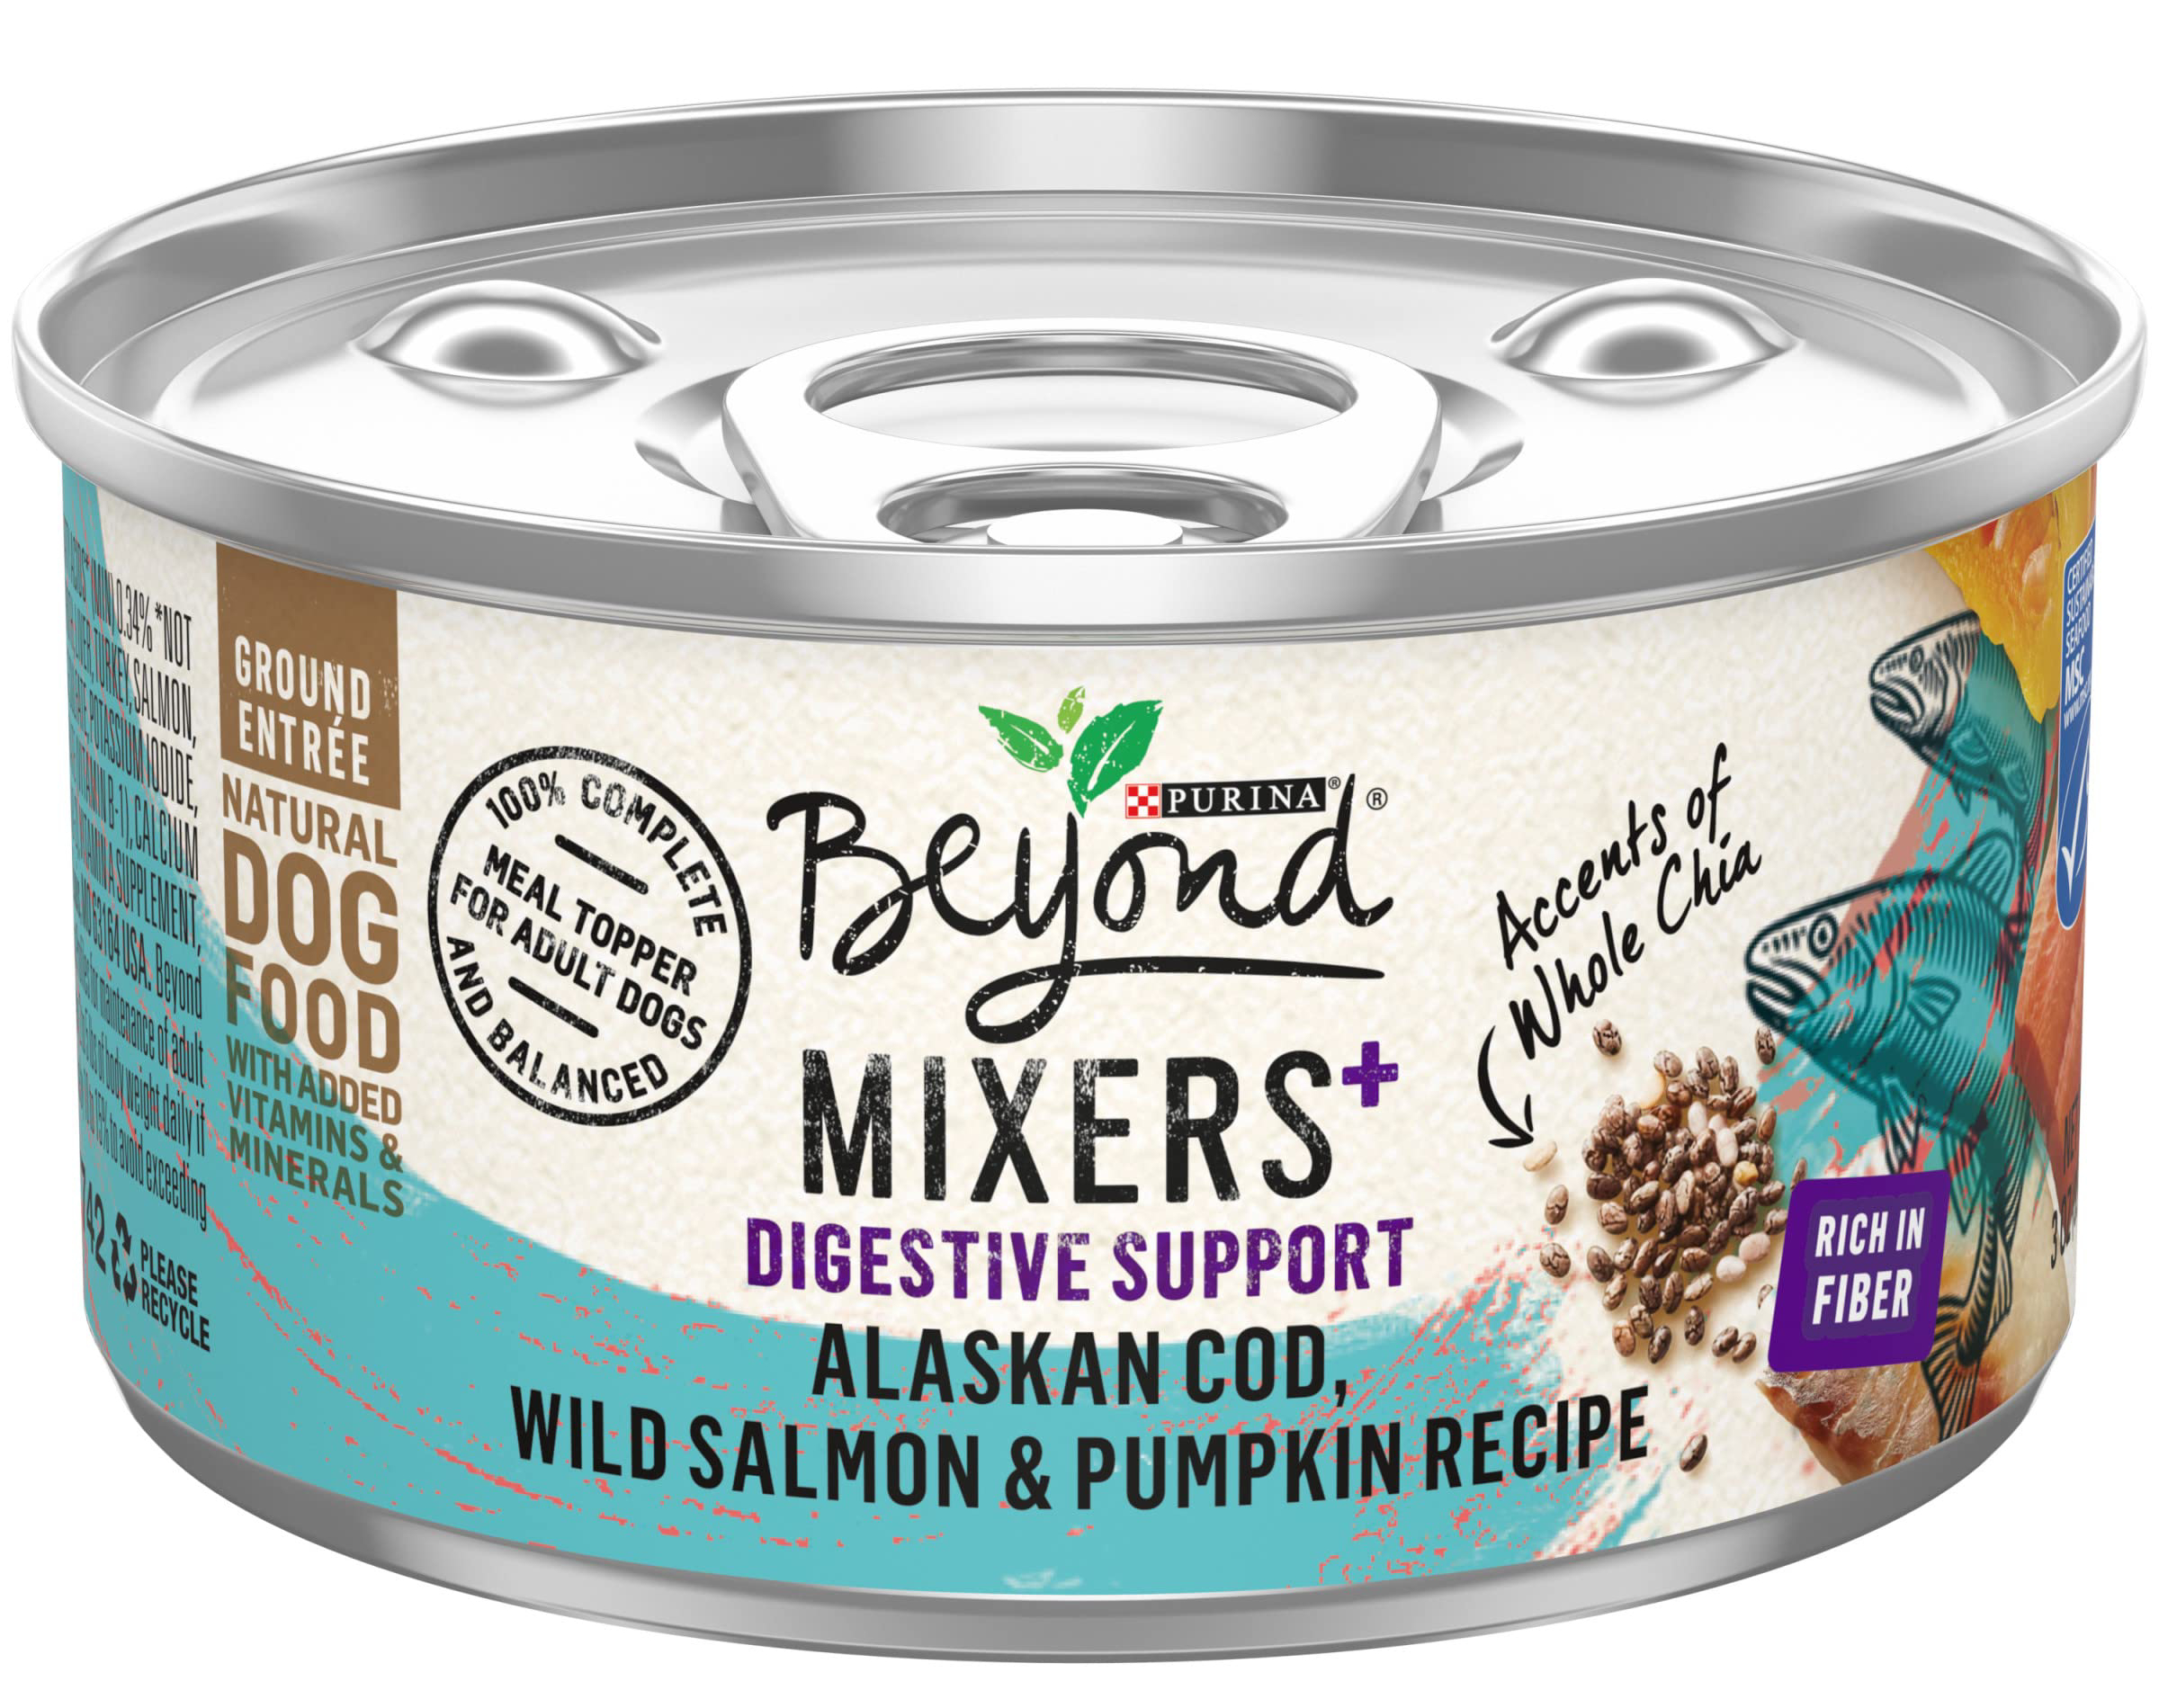 Purina Beyond Mixers+ Digestive Support 